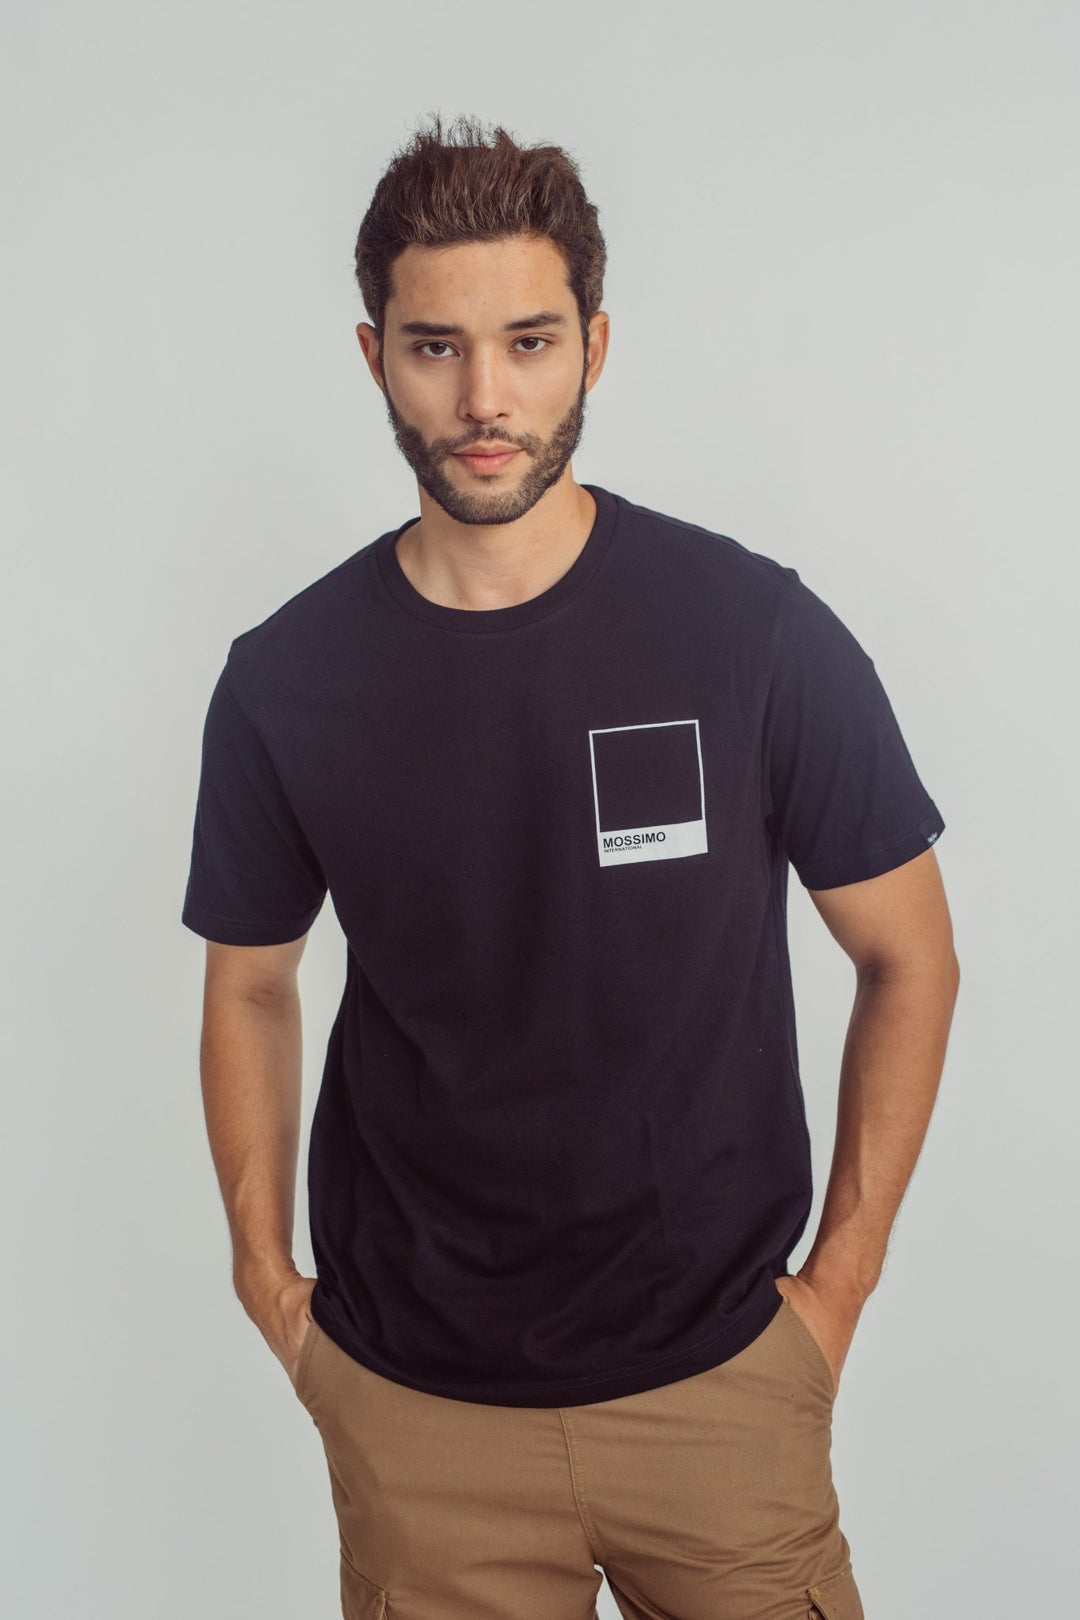 Black Basic Round Neck Modern Fit Tee with High Density Print - Mossimo PH